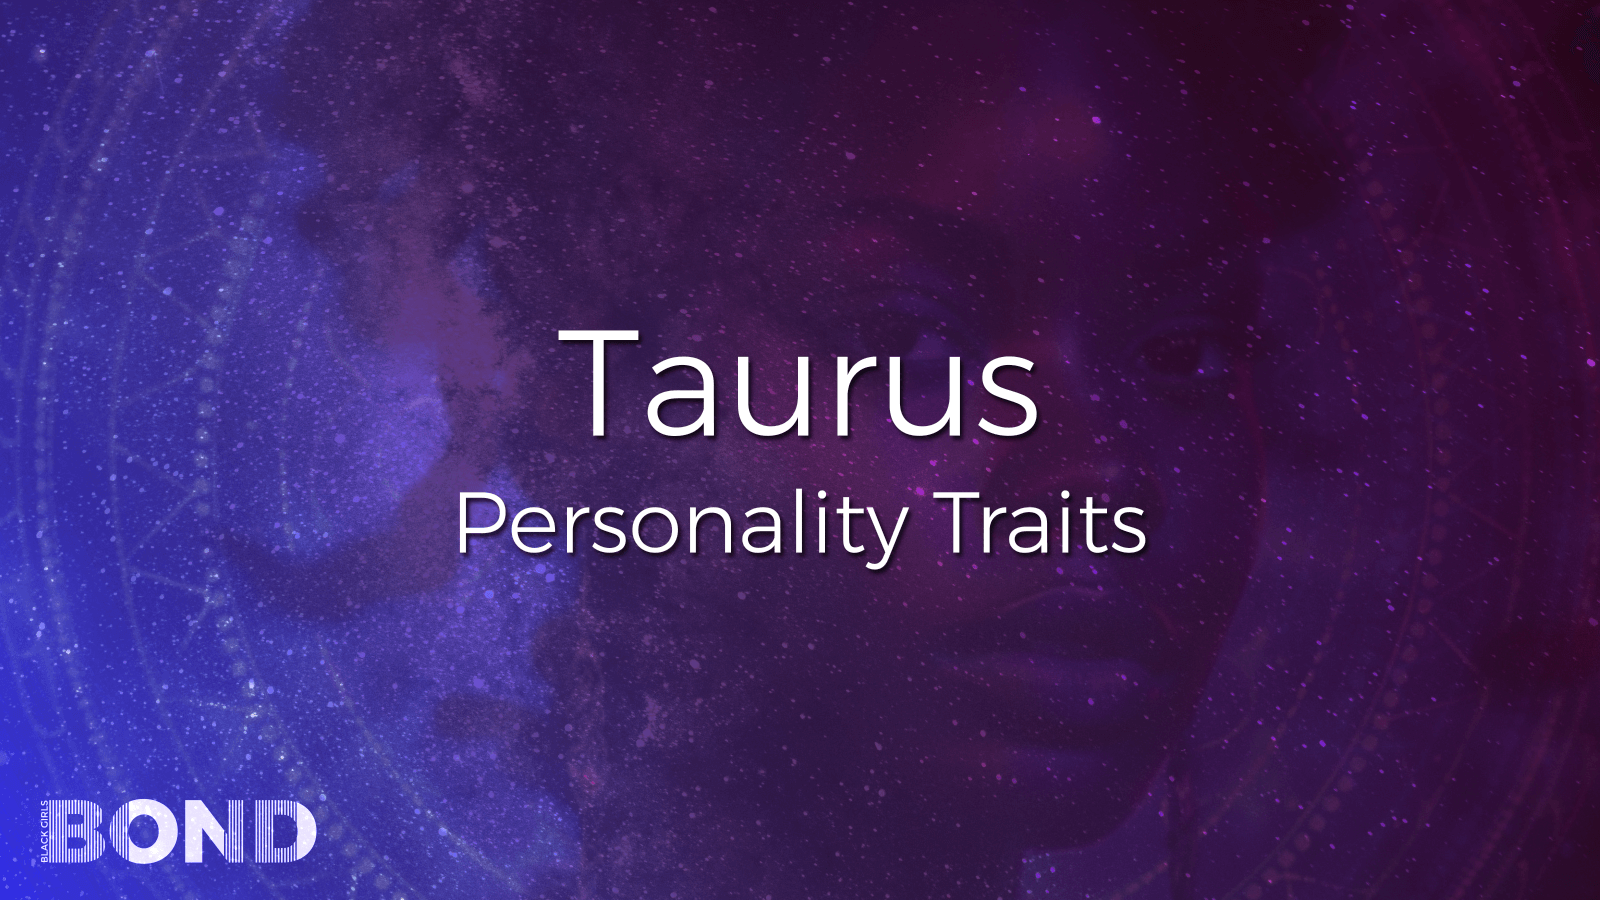 Taurus Zodiac Sign: Personality Traits, Compatibility, Love, Relationships and More